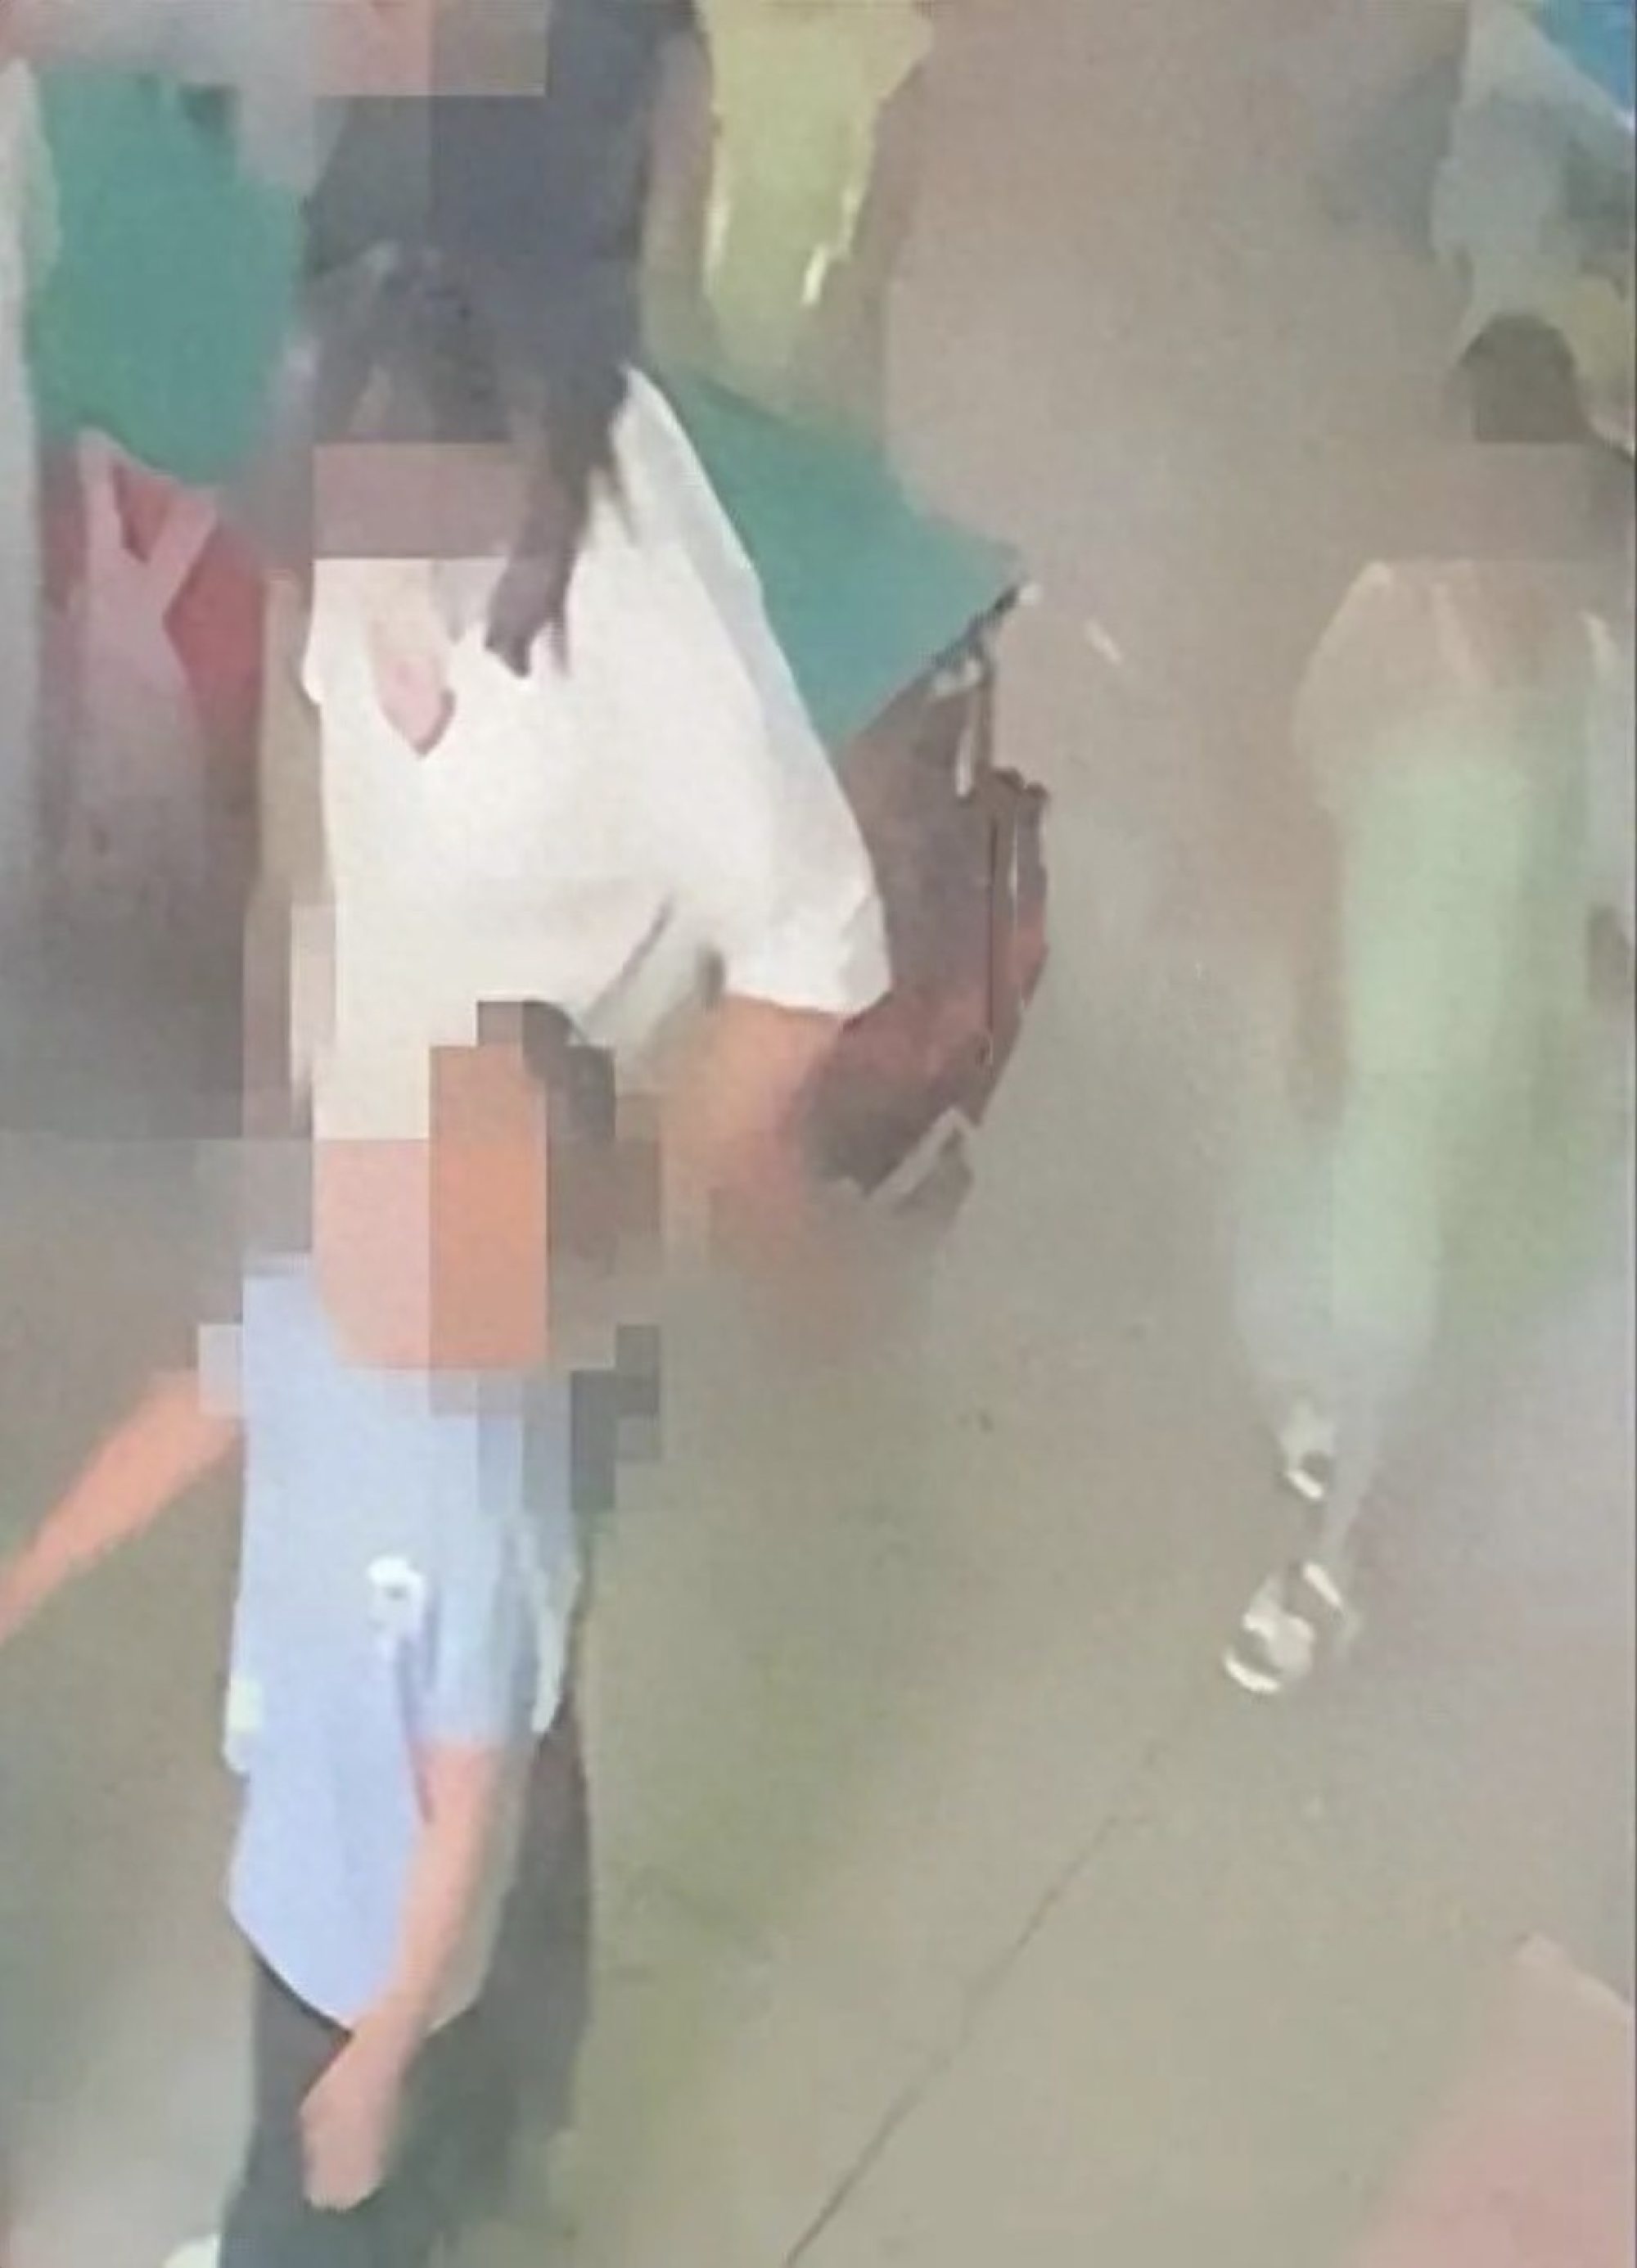 Surveillance footage from the kindergarten shows a teacher yanking a child by his hair from behind. Photo: Douyin